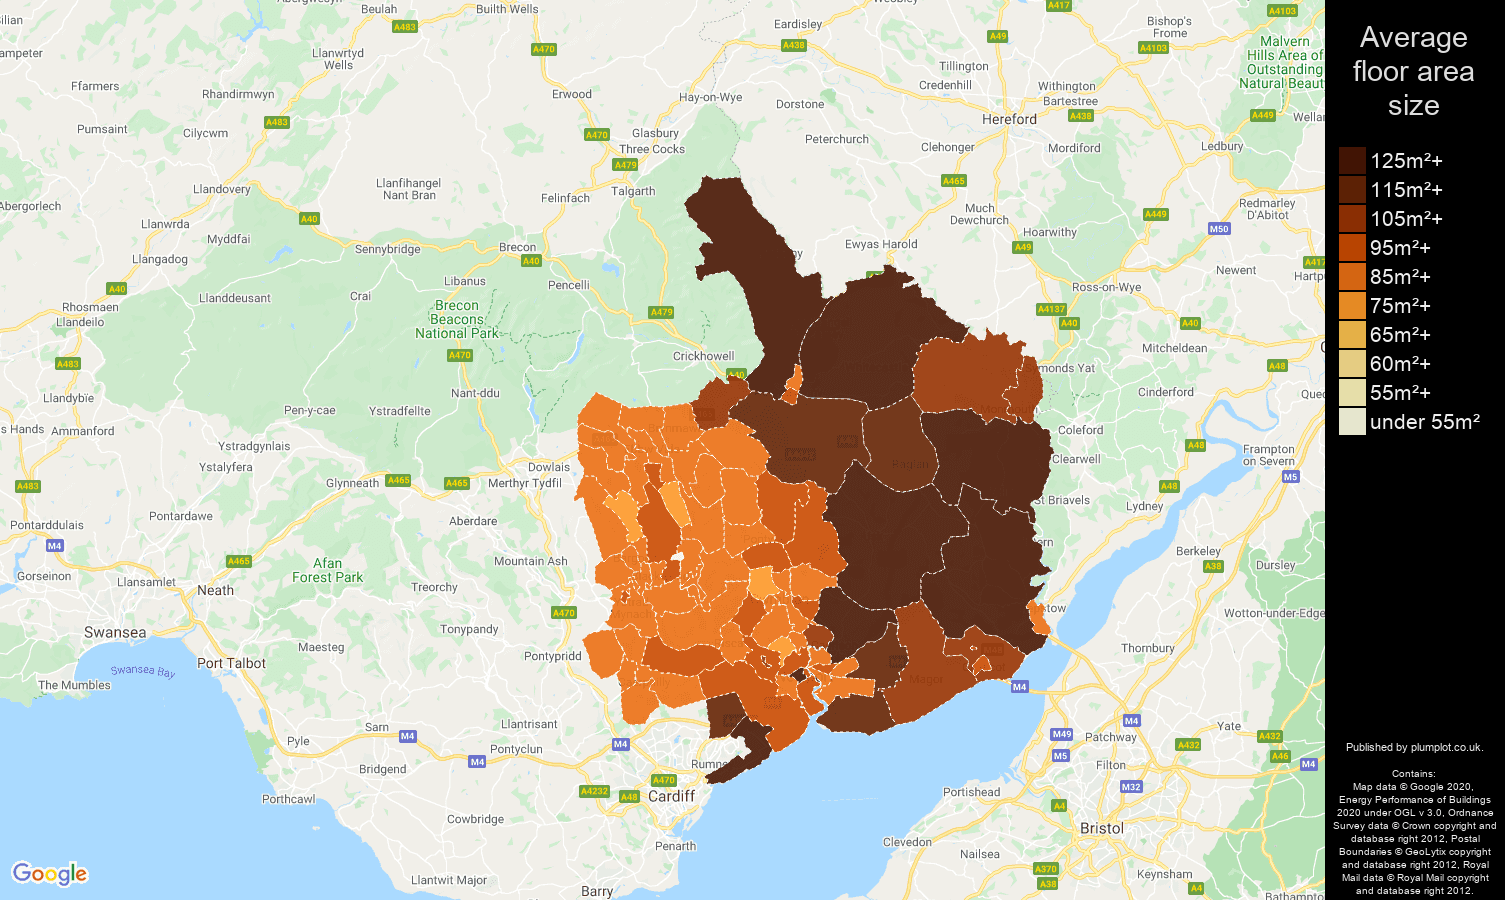 Gwent map of average floor area size of houses